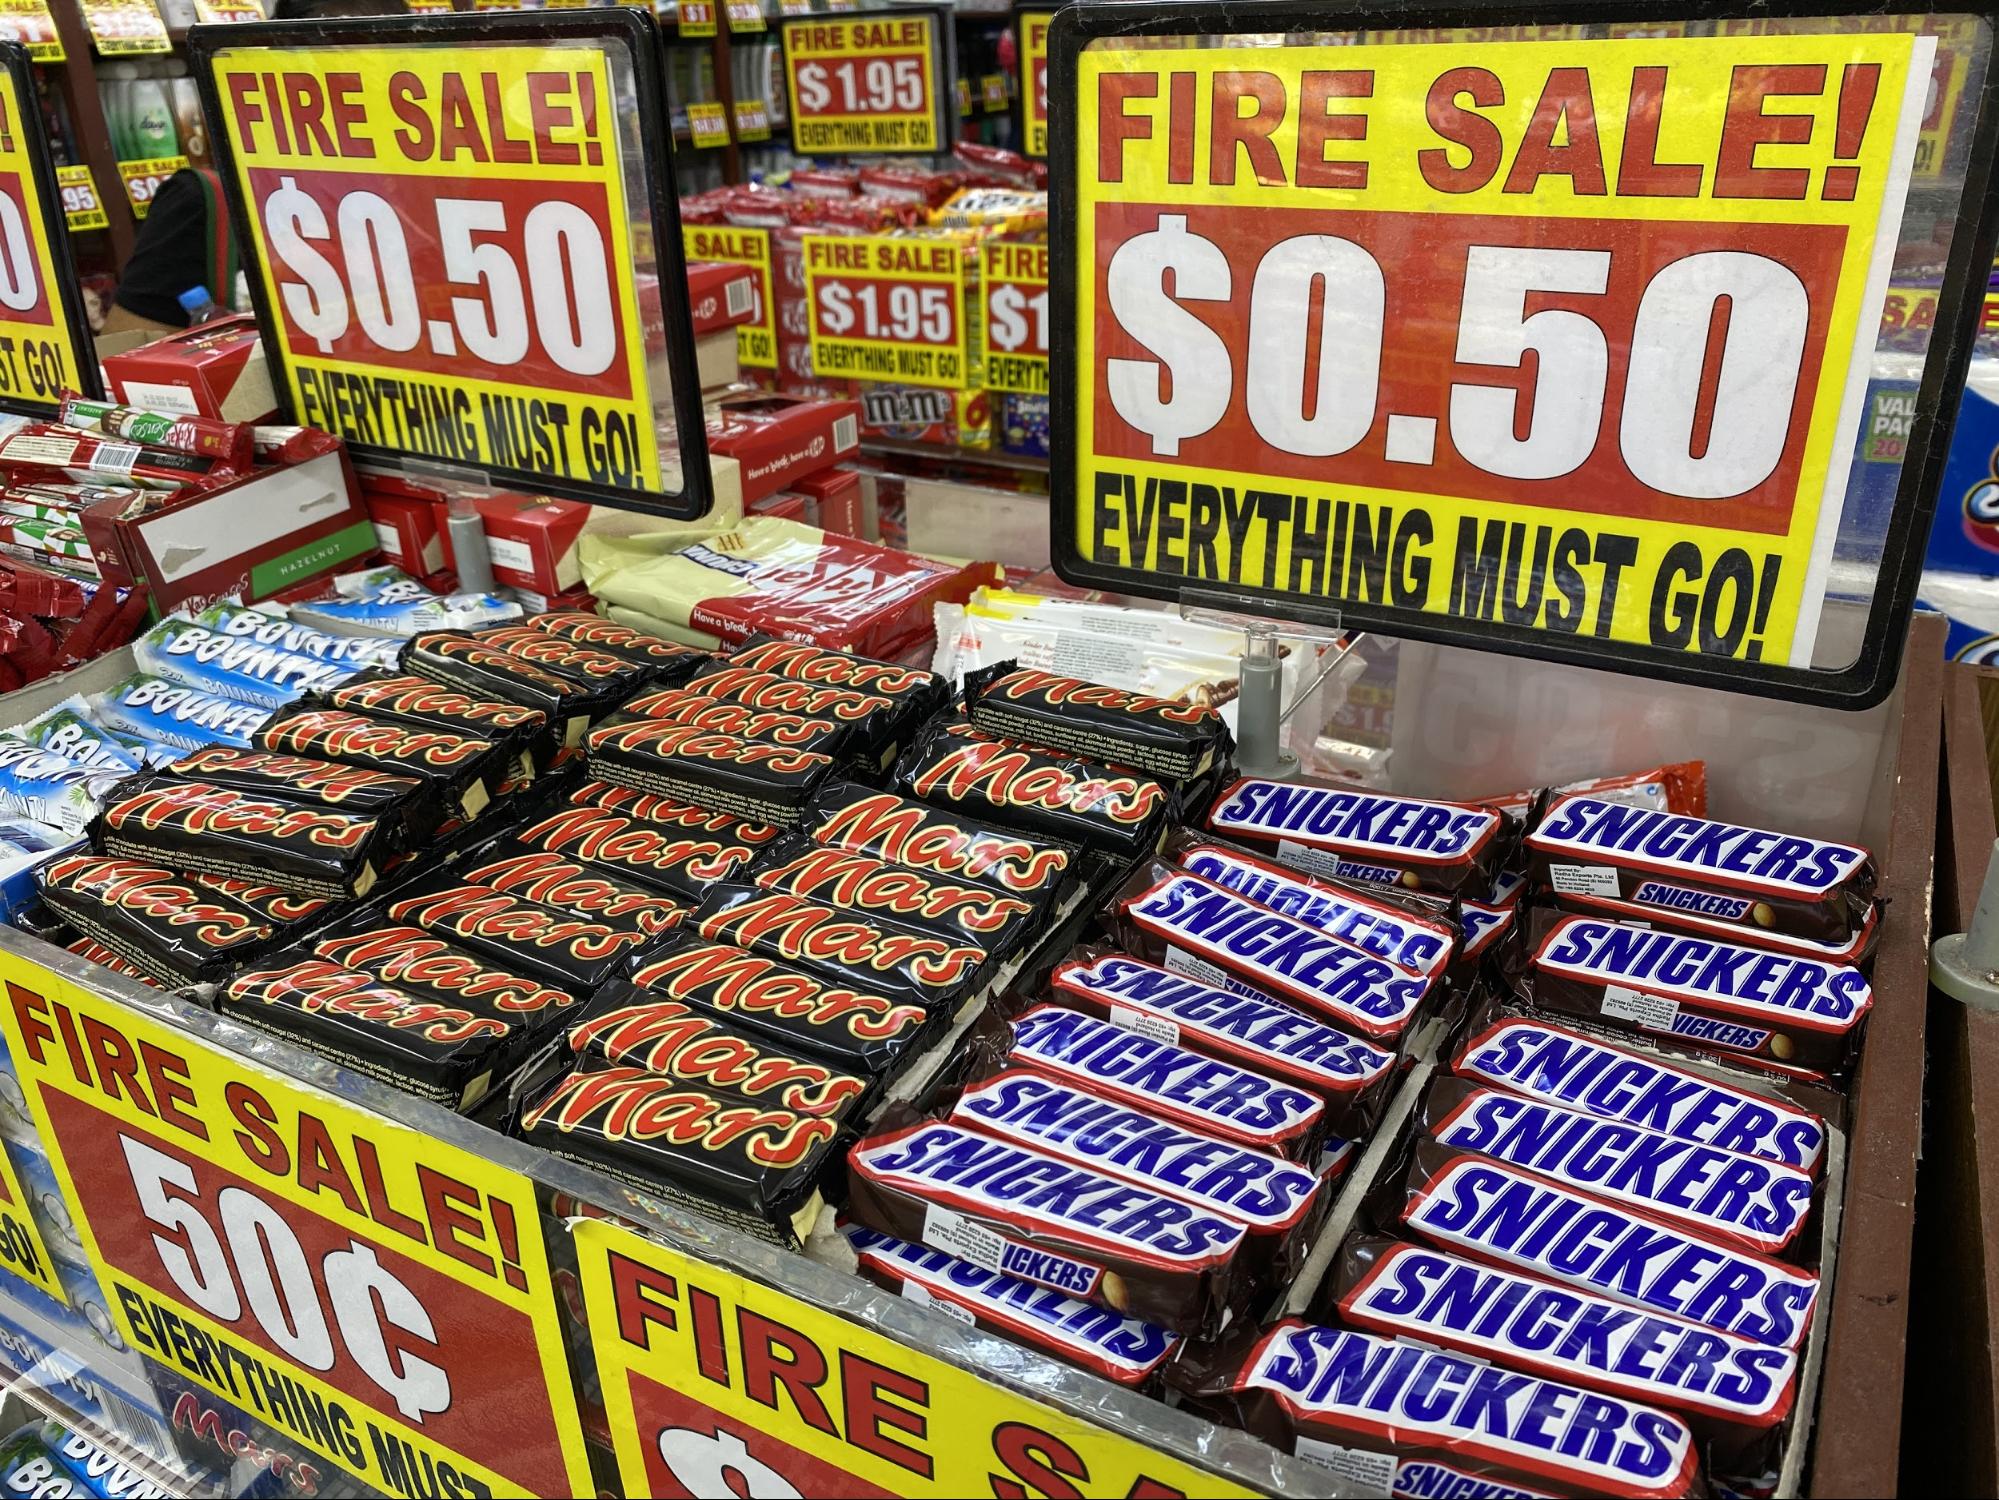 Mars, Snickers and Bounty bars at $0.50.